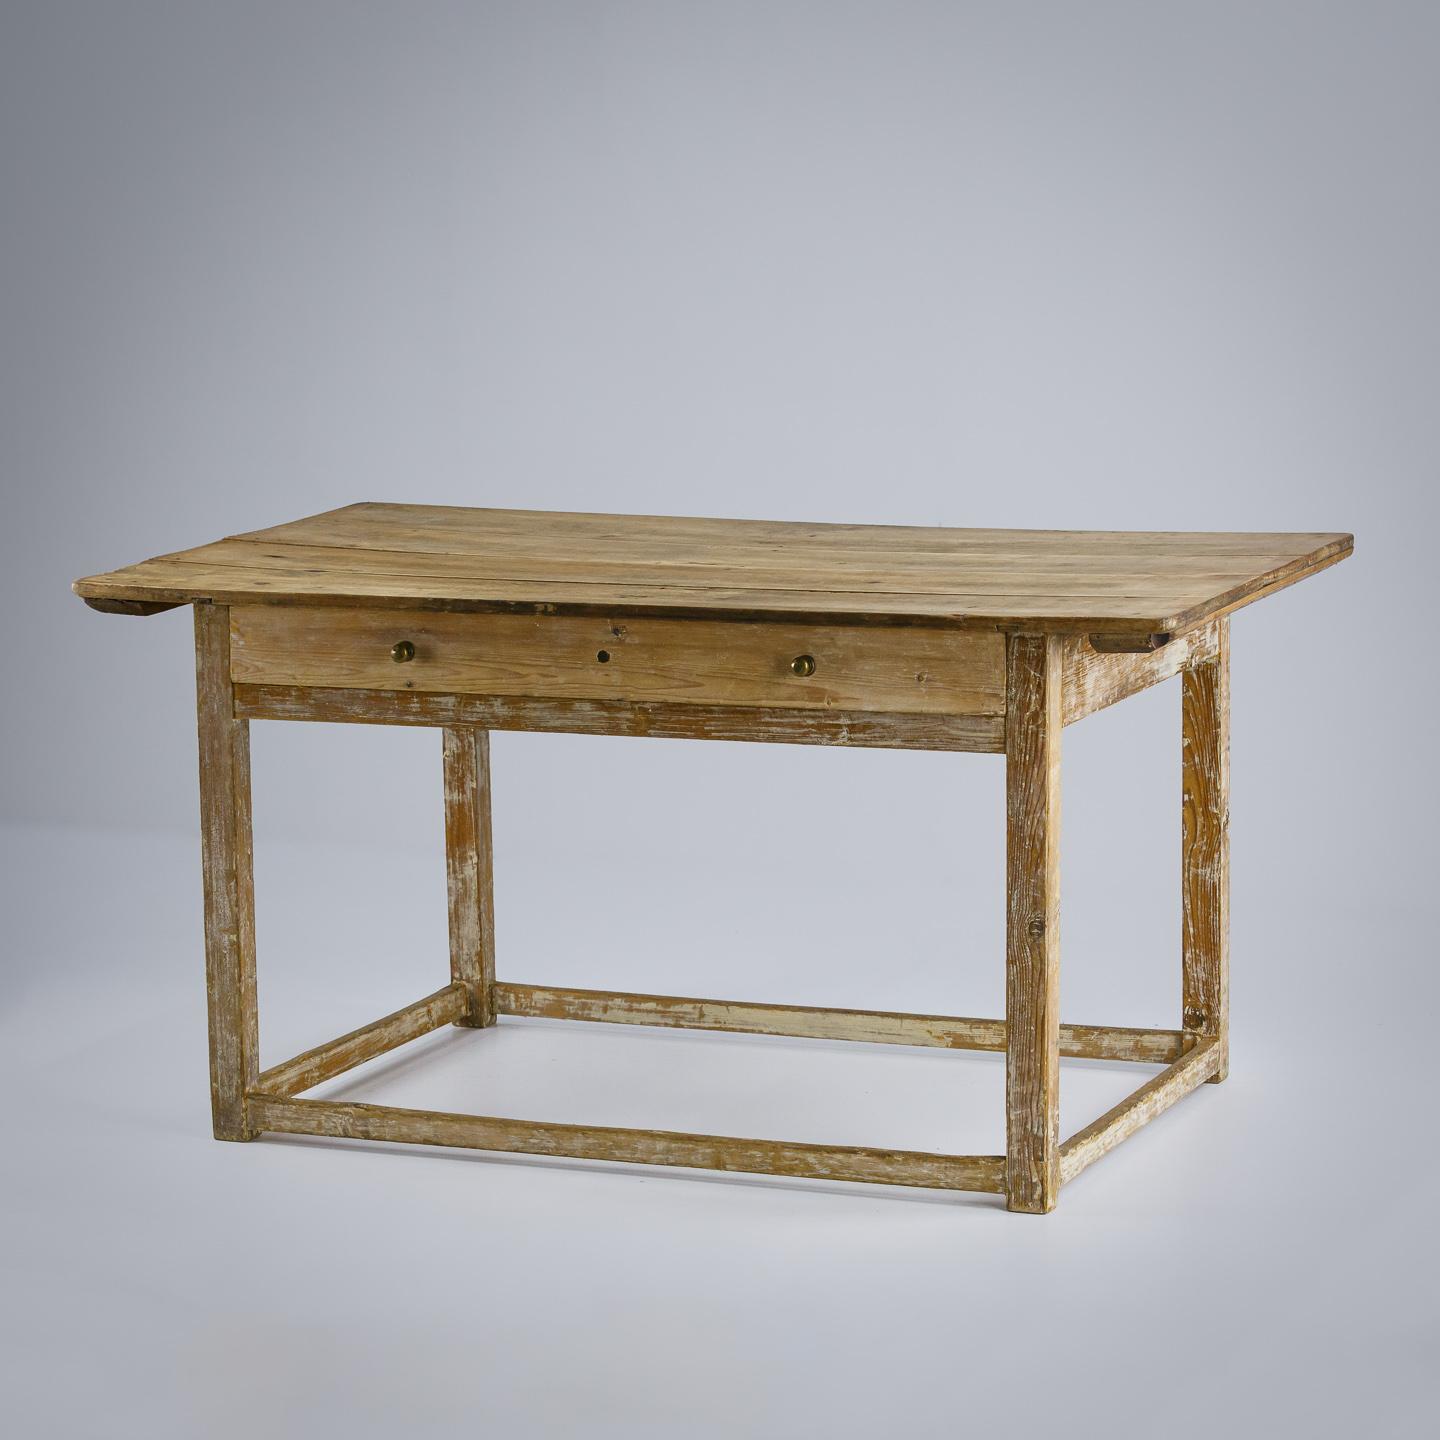 19th Century Swedish prep table, dry scraped base, with remnant paint finish, nice clean scrubbed plank boards. Large drawer. Good wear and patination. Sweden Circa 1900.